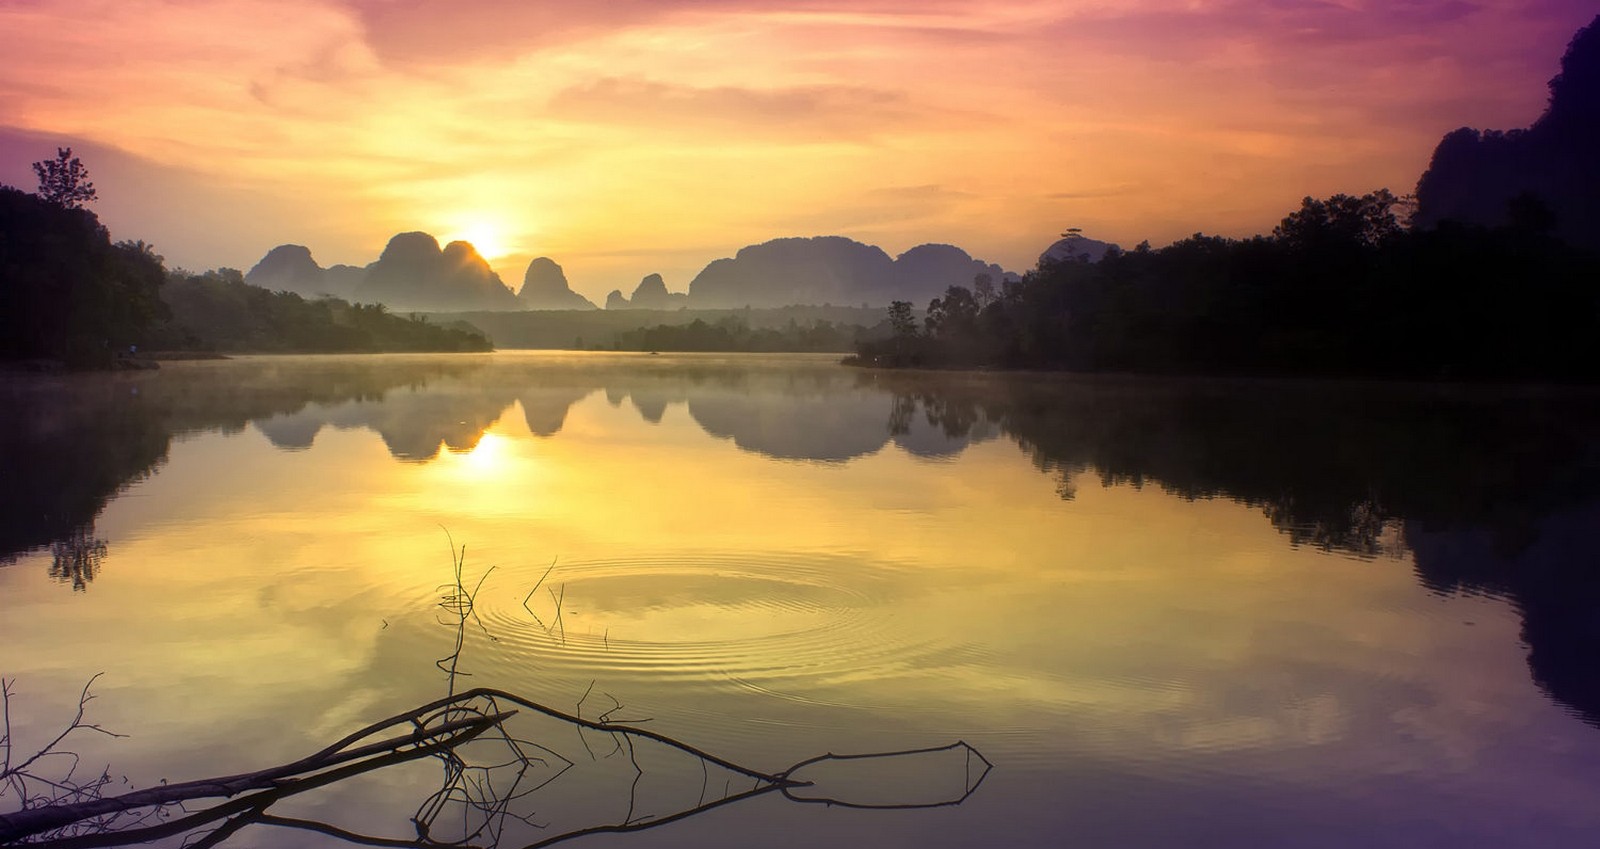 General 1600x849 photography landscape nature lake morning sunlight calm reflection hills sky clouds trees Thailand Asia